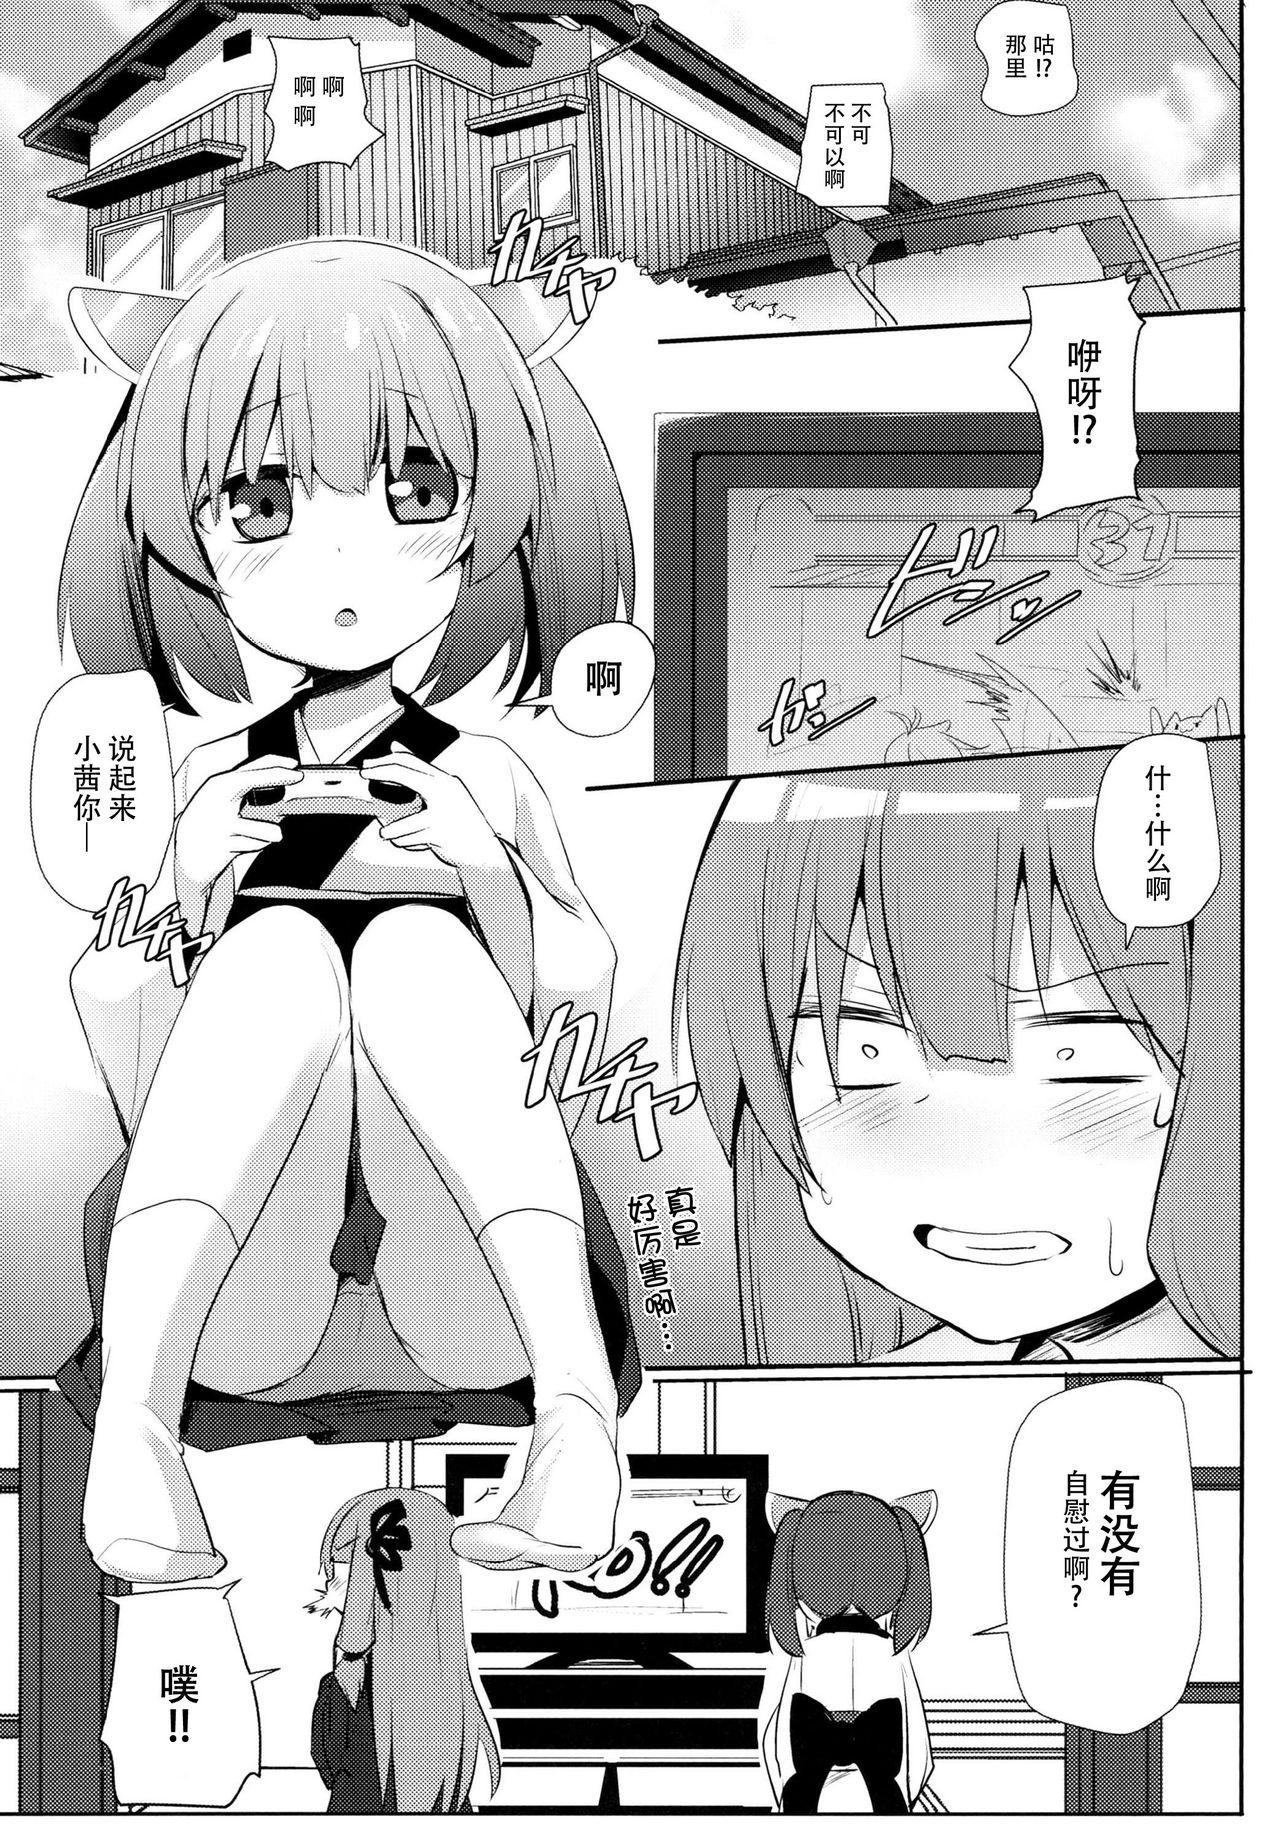 Oral (C93) [Milk pudding (Jamcy)] Akane-chan Challenge! 2-kaime (VOICEROID) [Chinese] [脸肿汉化组] - Voiceroid Facial - Page 4